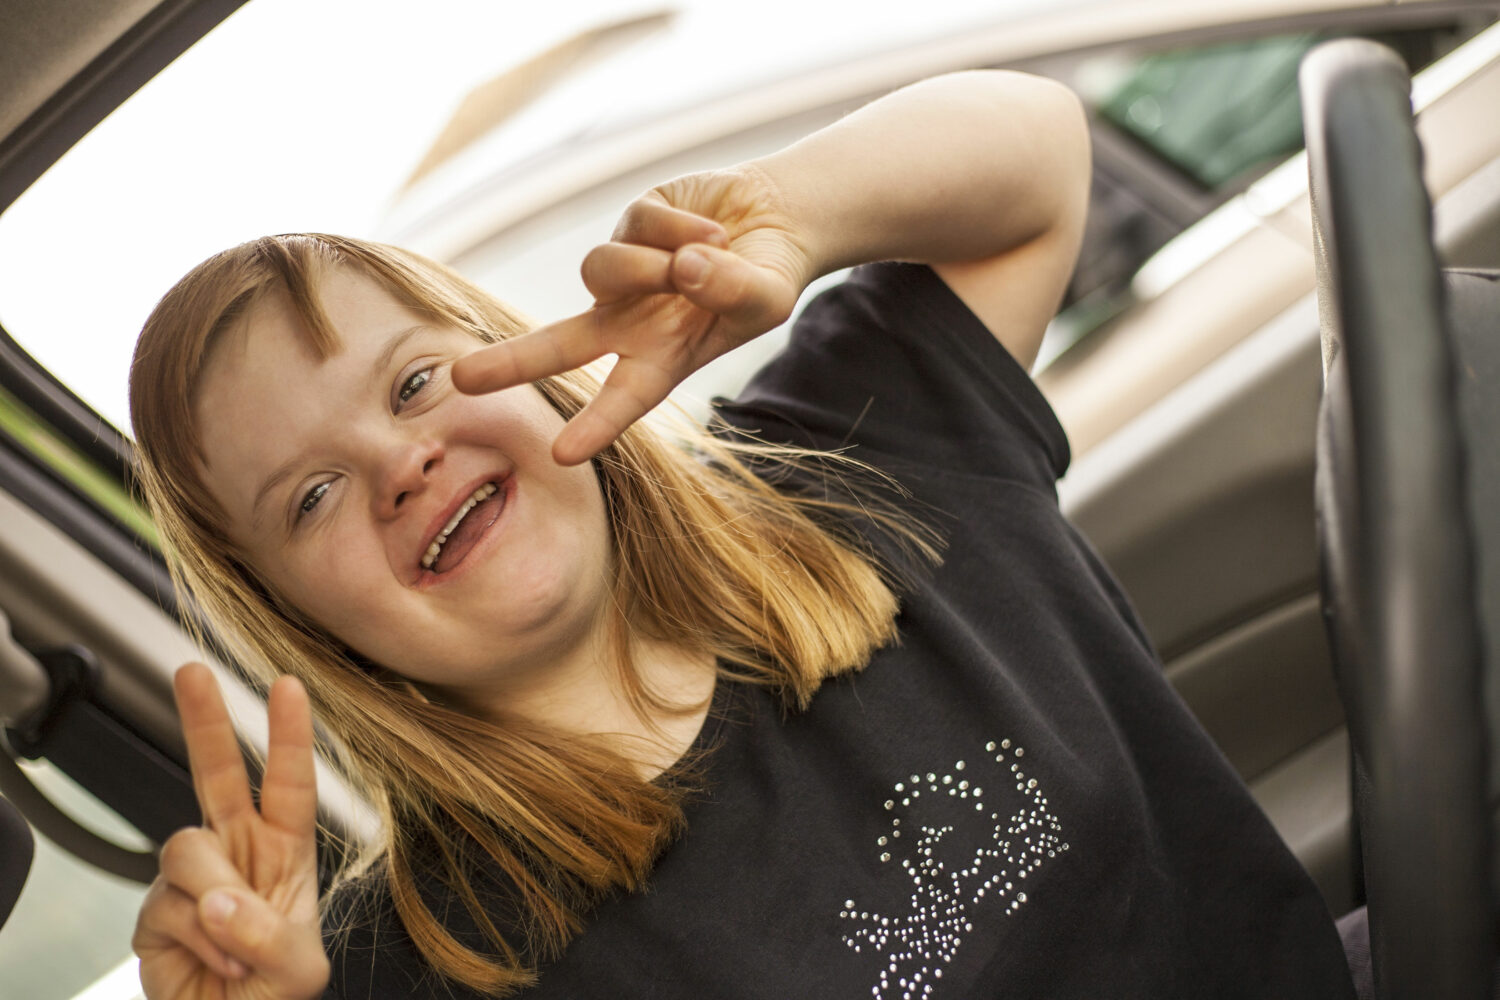 white woman with Down syndrome, with long blonde hair, sits behind the steering wheel of a car and flashes a double peace sign